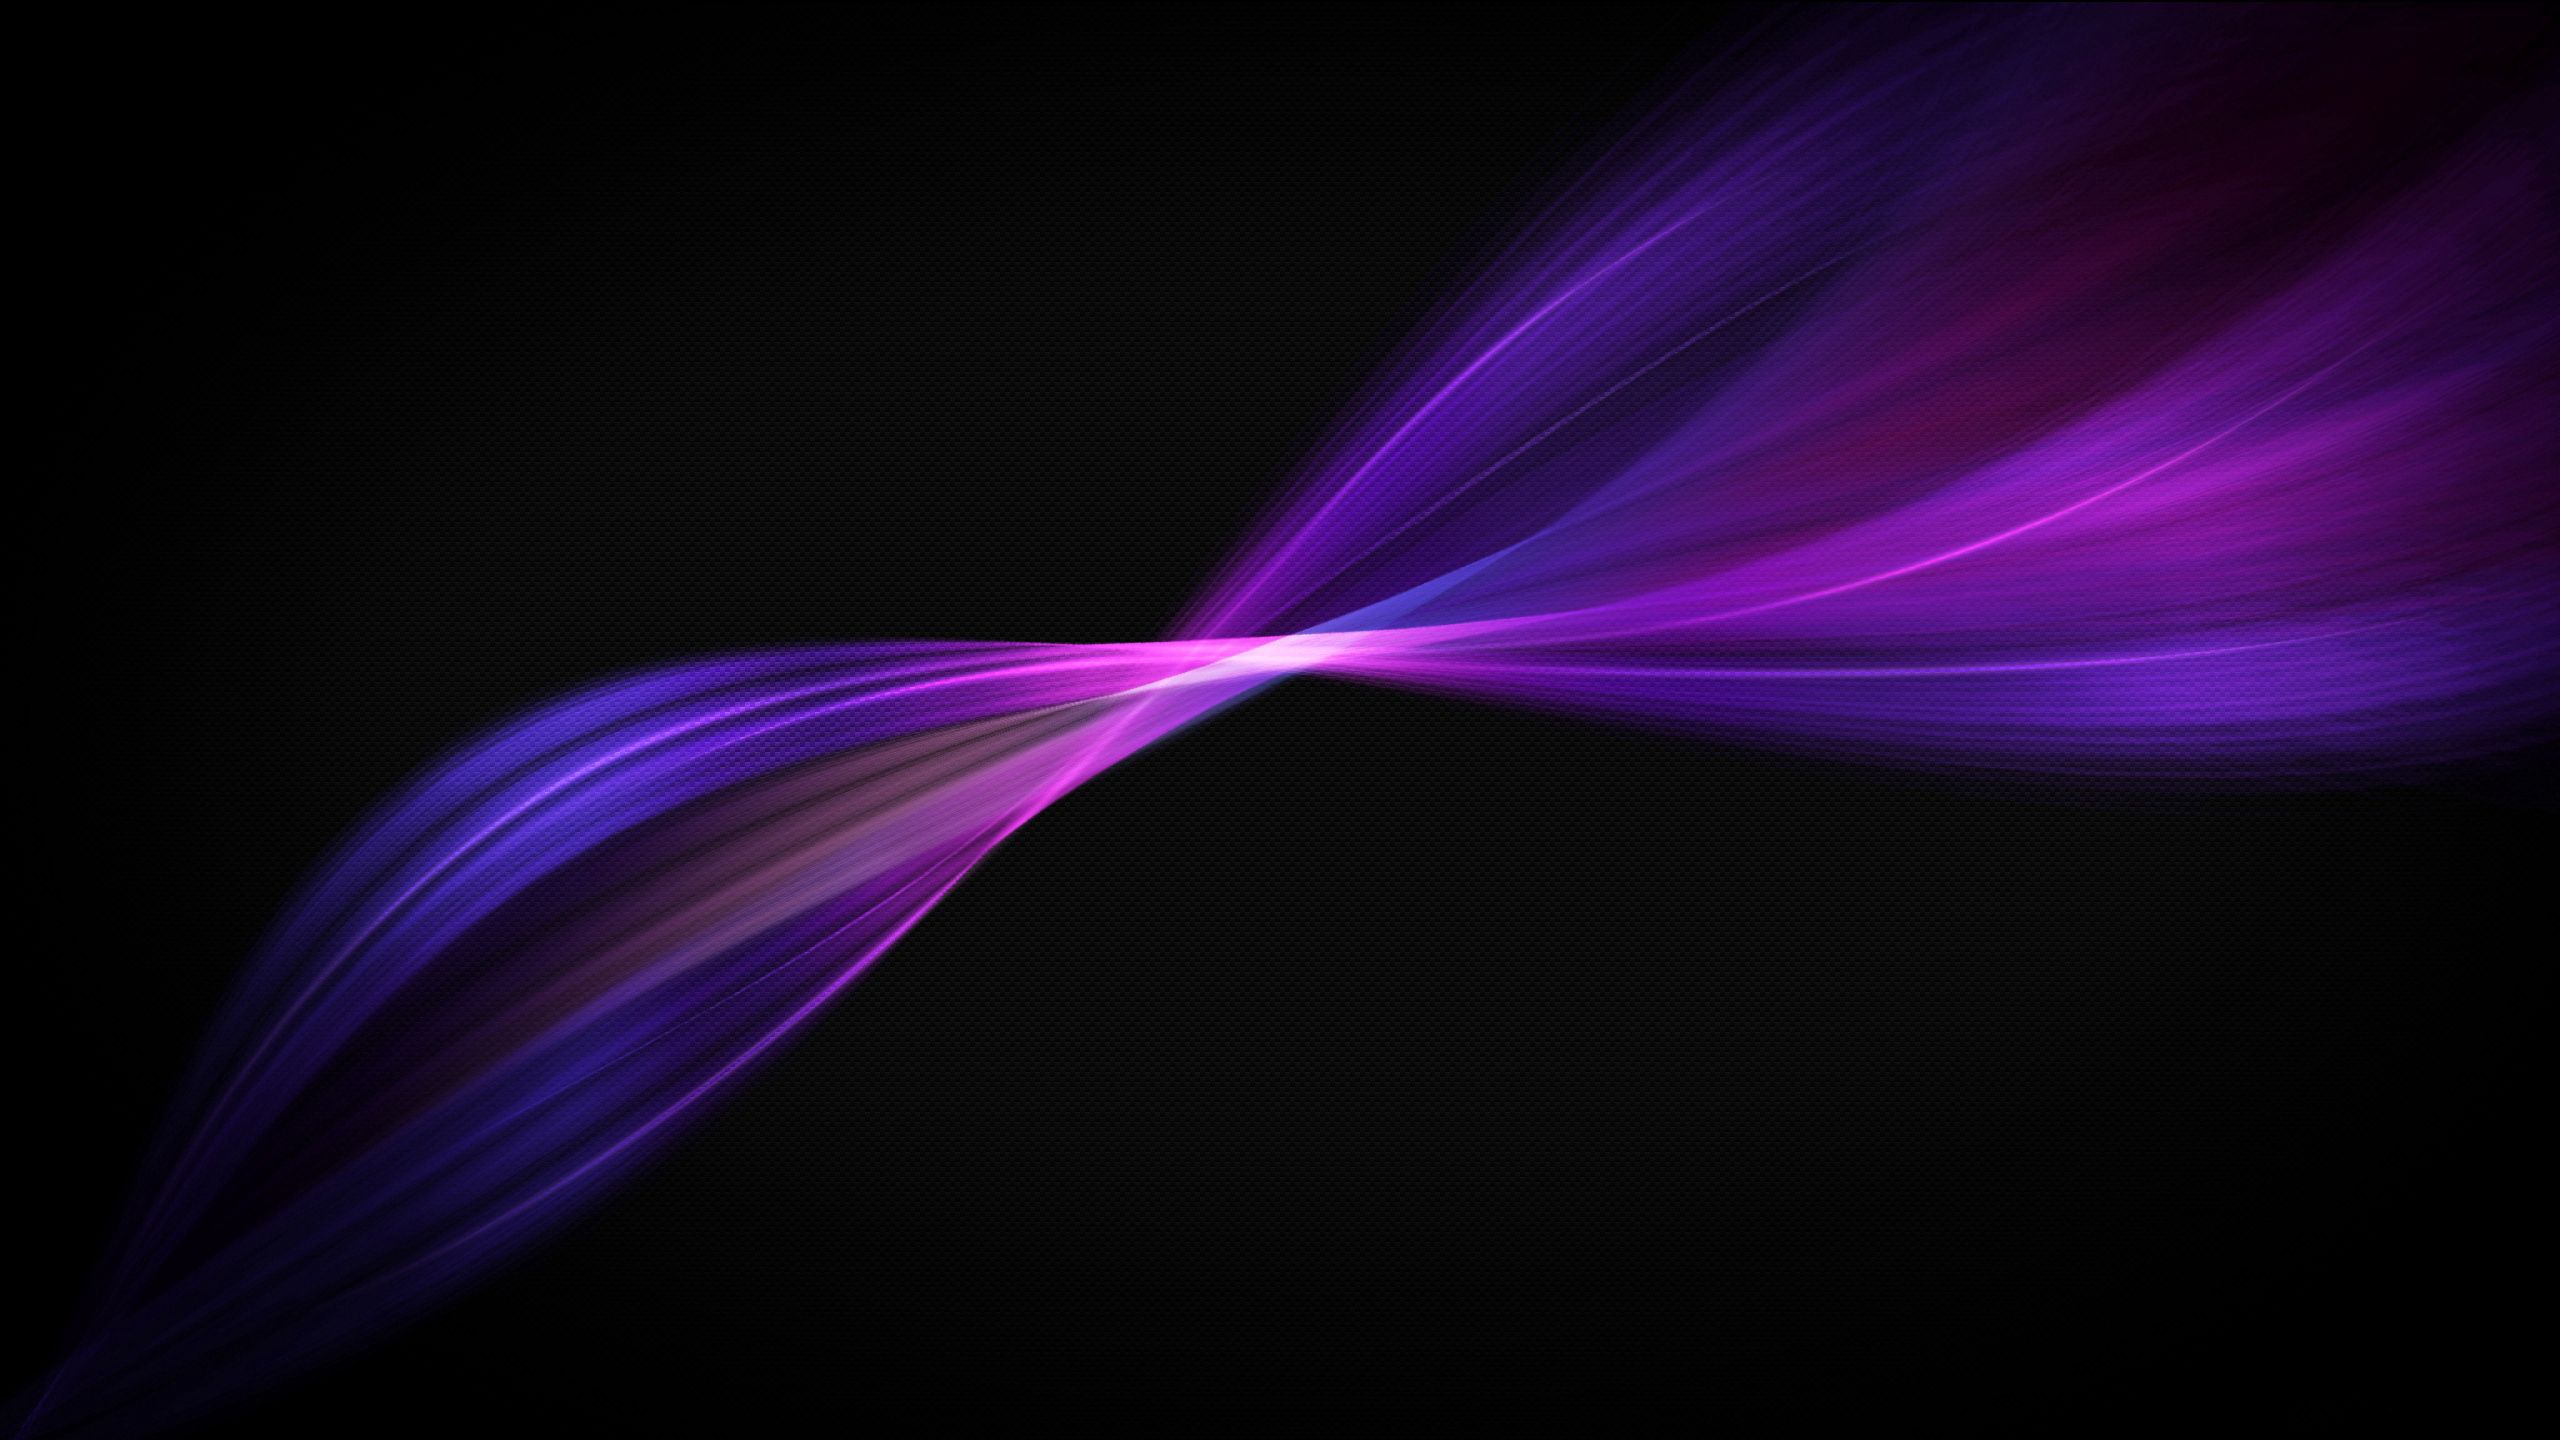 color, graphics, background, purple, black, abstract, violet, lines QHD